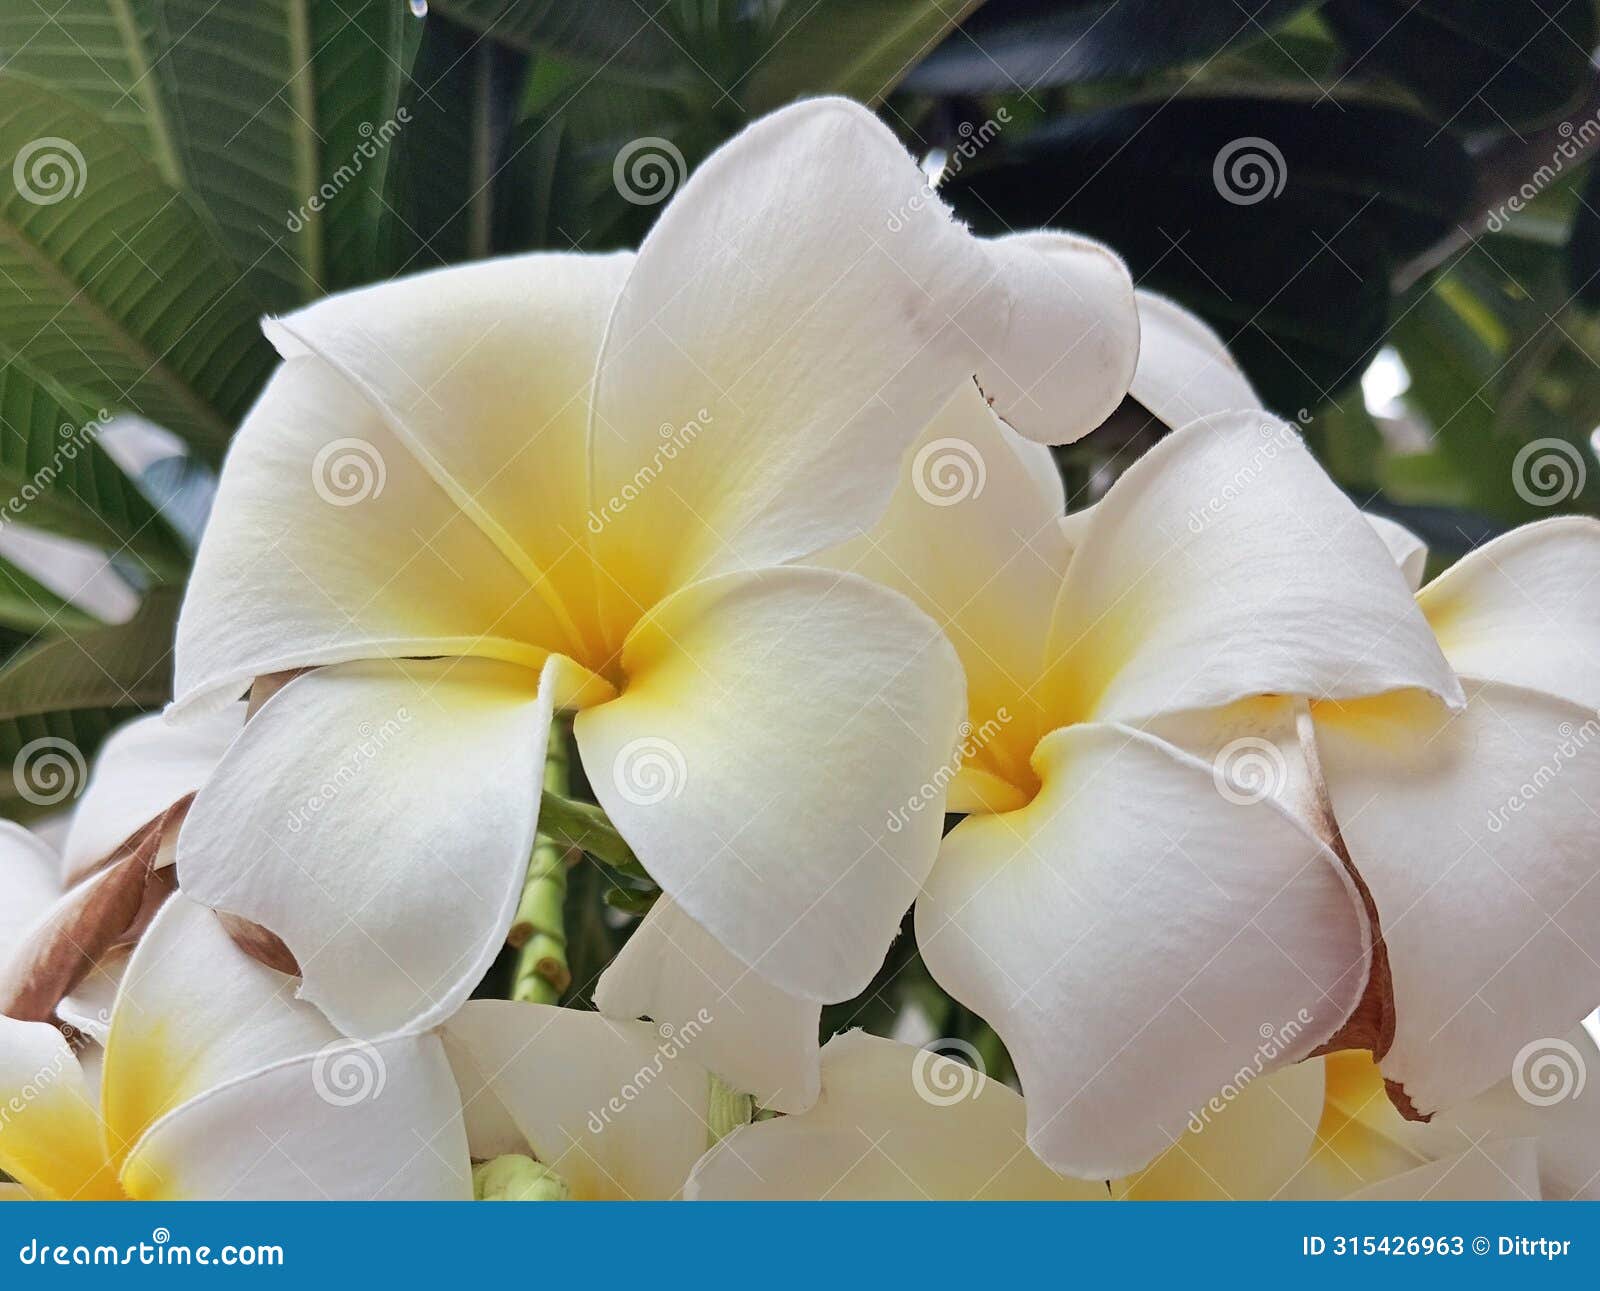 plumeria alba, the flowers and aroma are distinctive, has a white crown which usually has five strands.